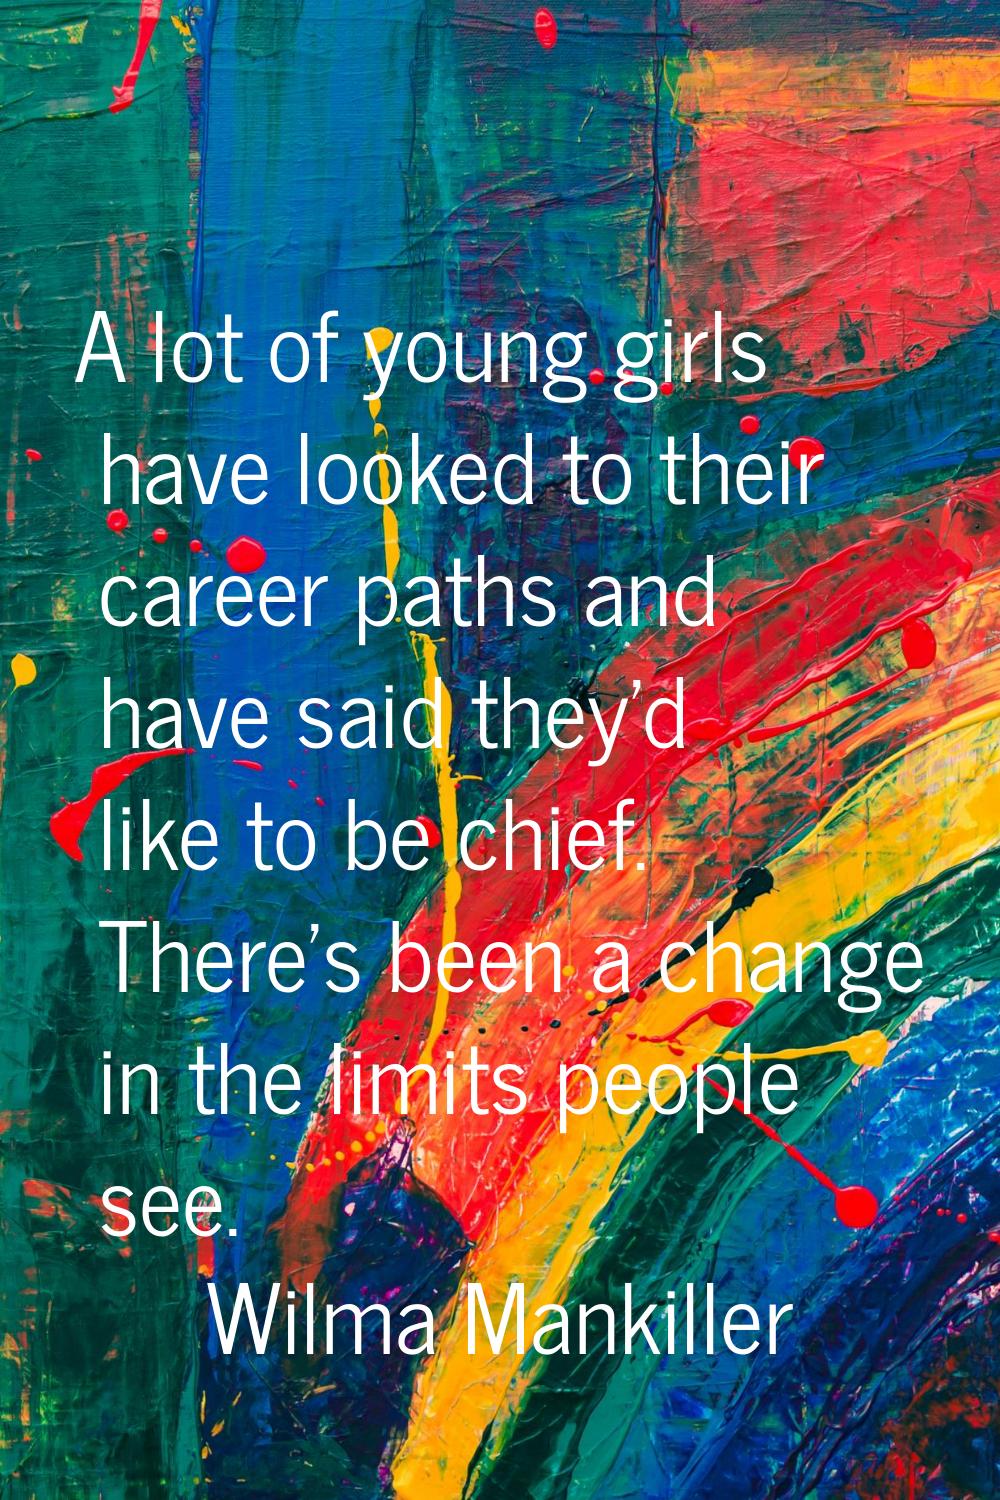 A lot of young girls have looked to their career paths and have said they'd like to be chief. There